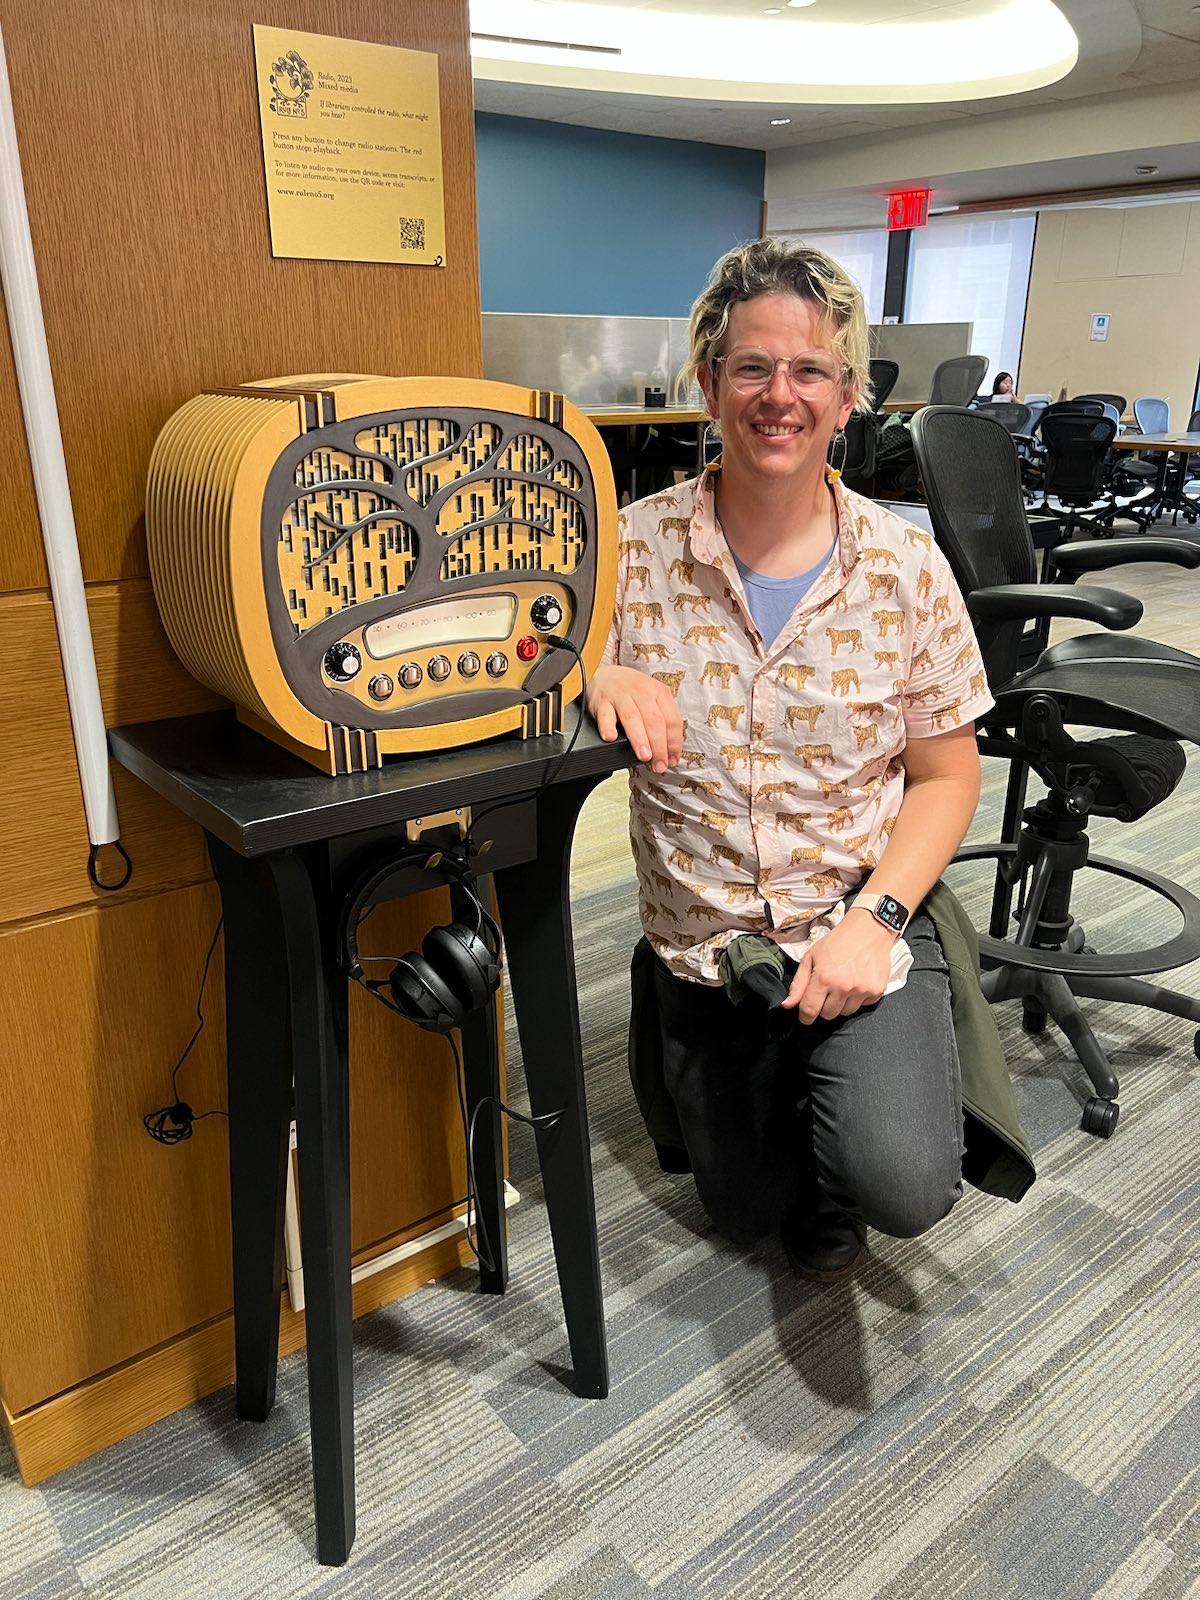 Sam kneeling next to what looks to be an old timey radio in Bobst library that plays RadLib Call Numbers Station